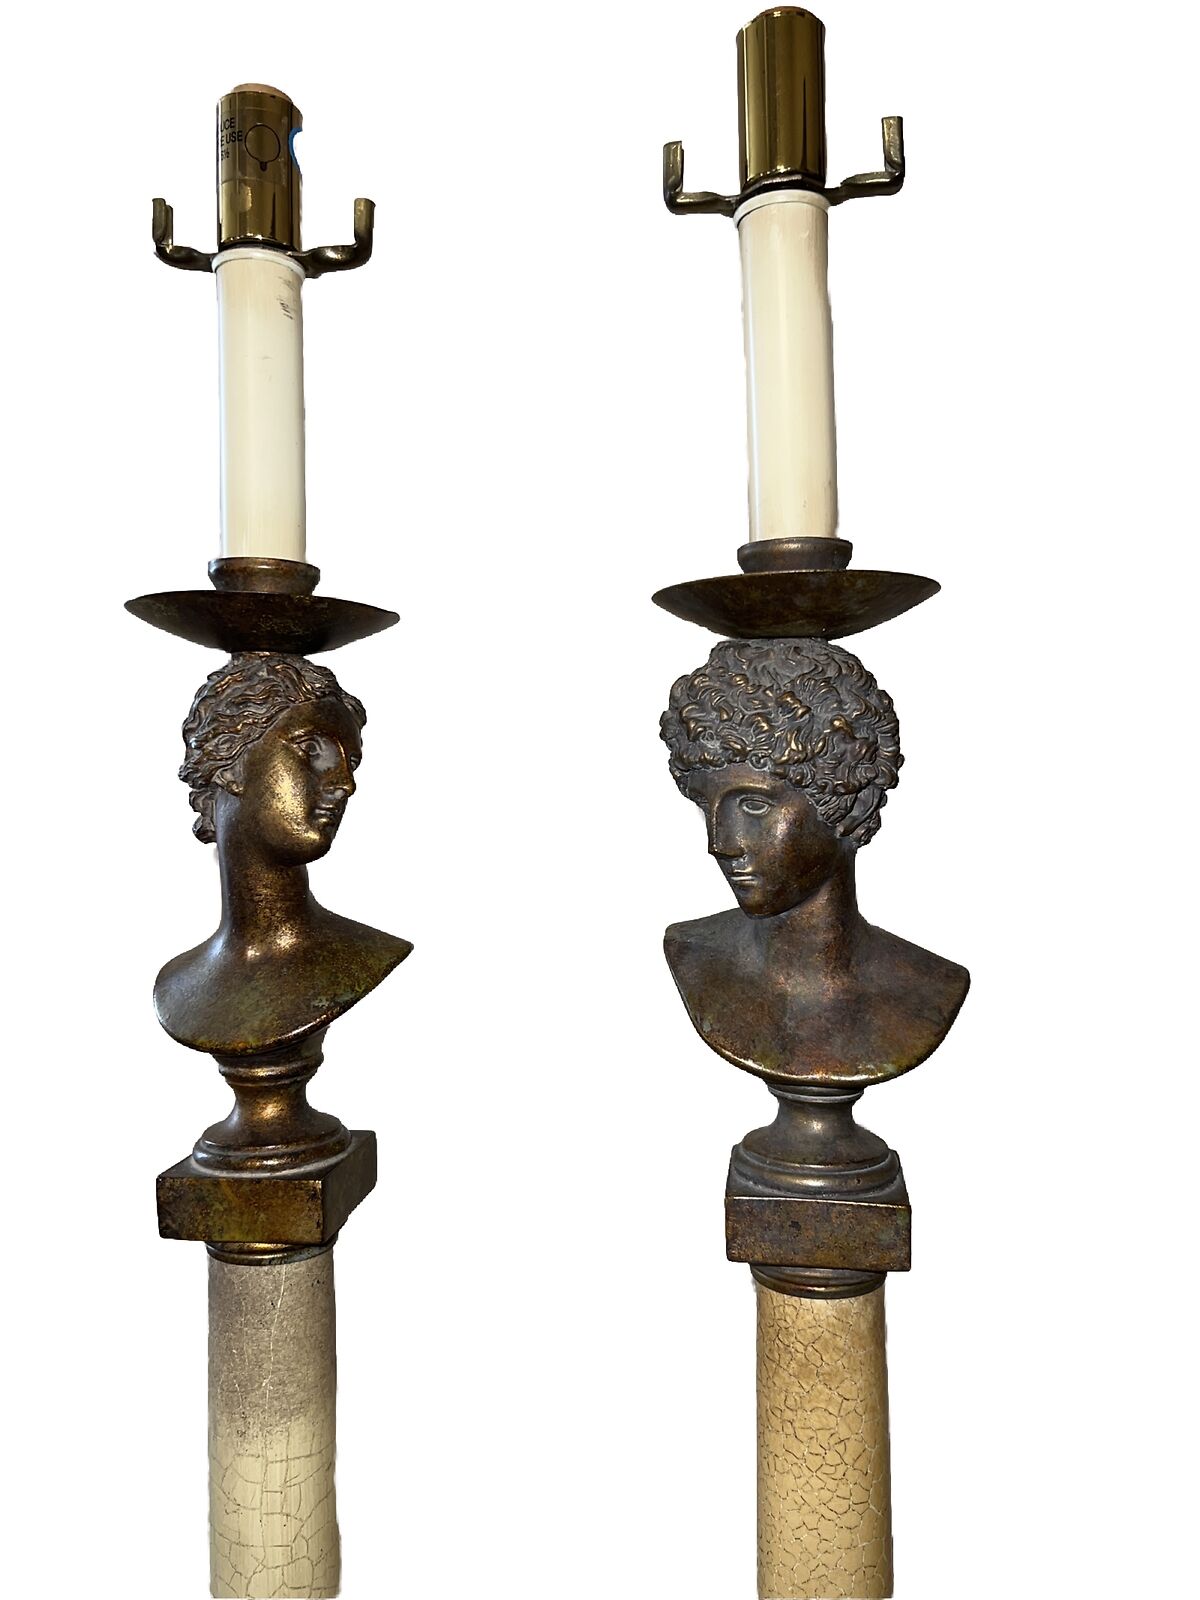 Exquisite Pair of Fine Art Lamps Out of Miami Florida